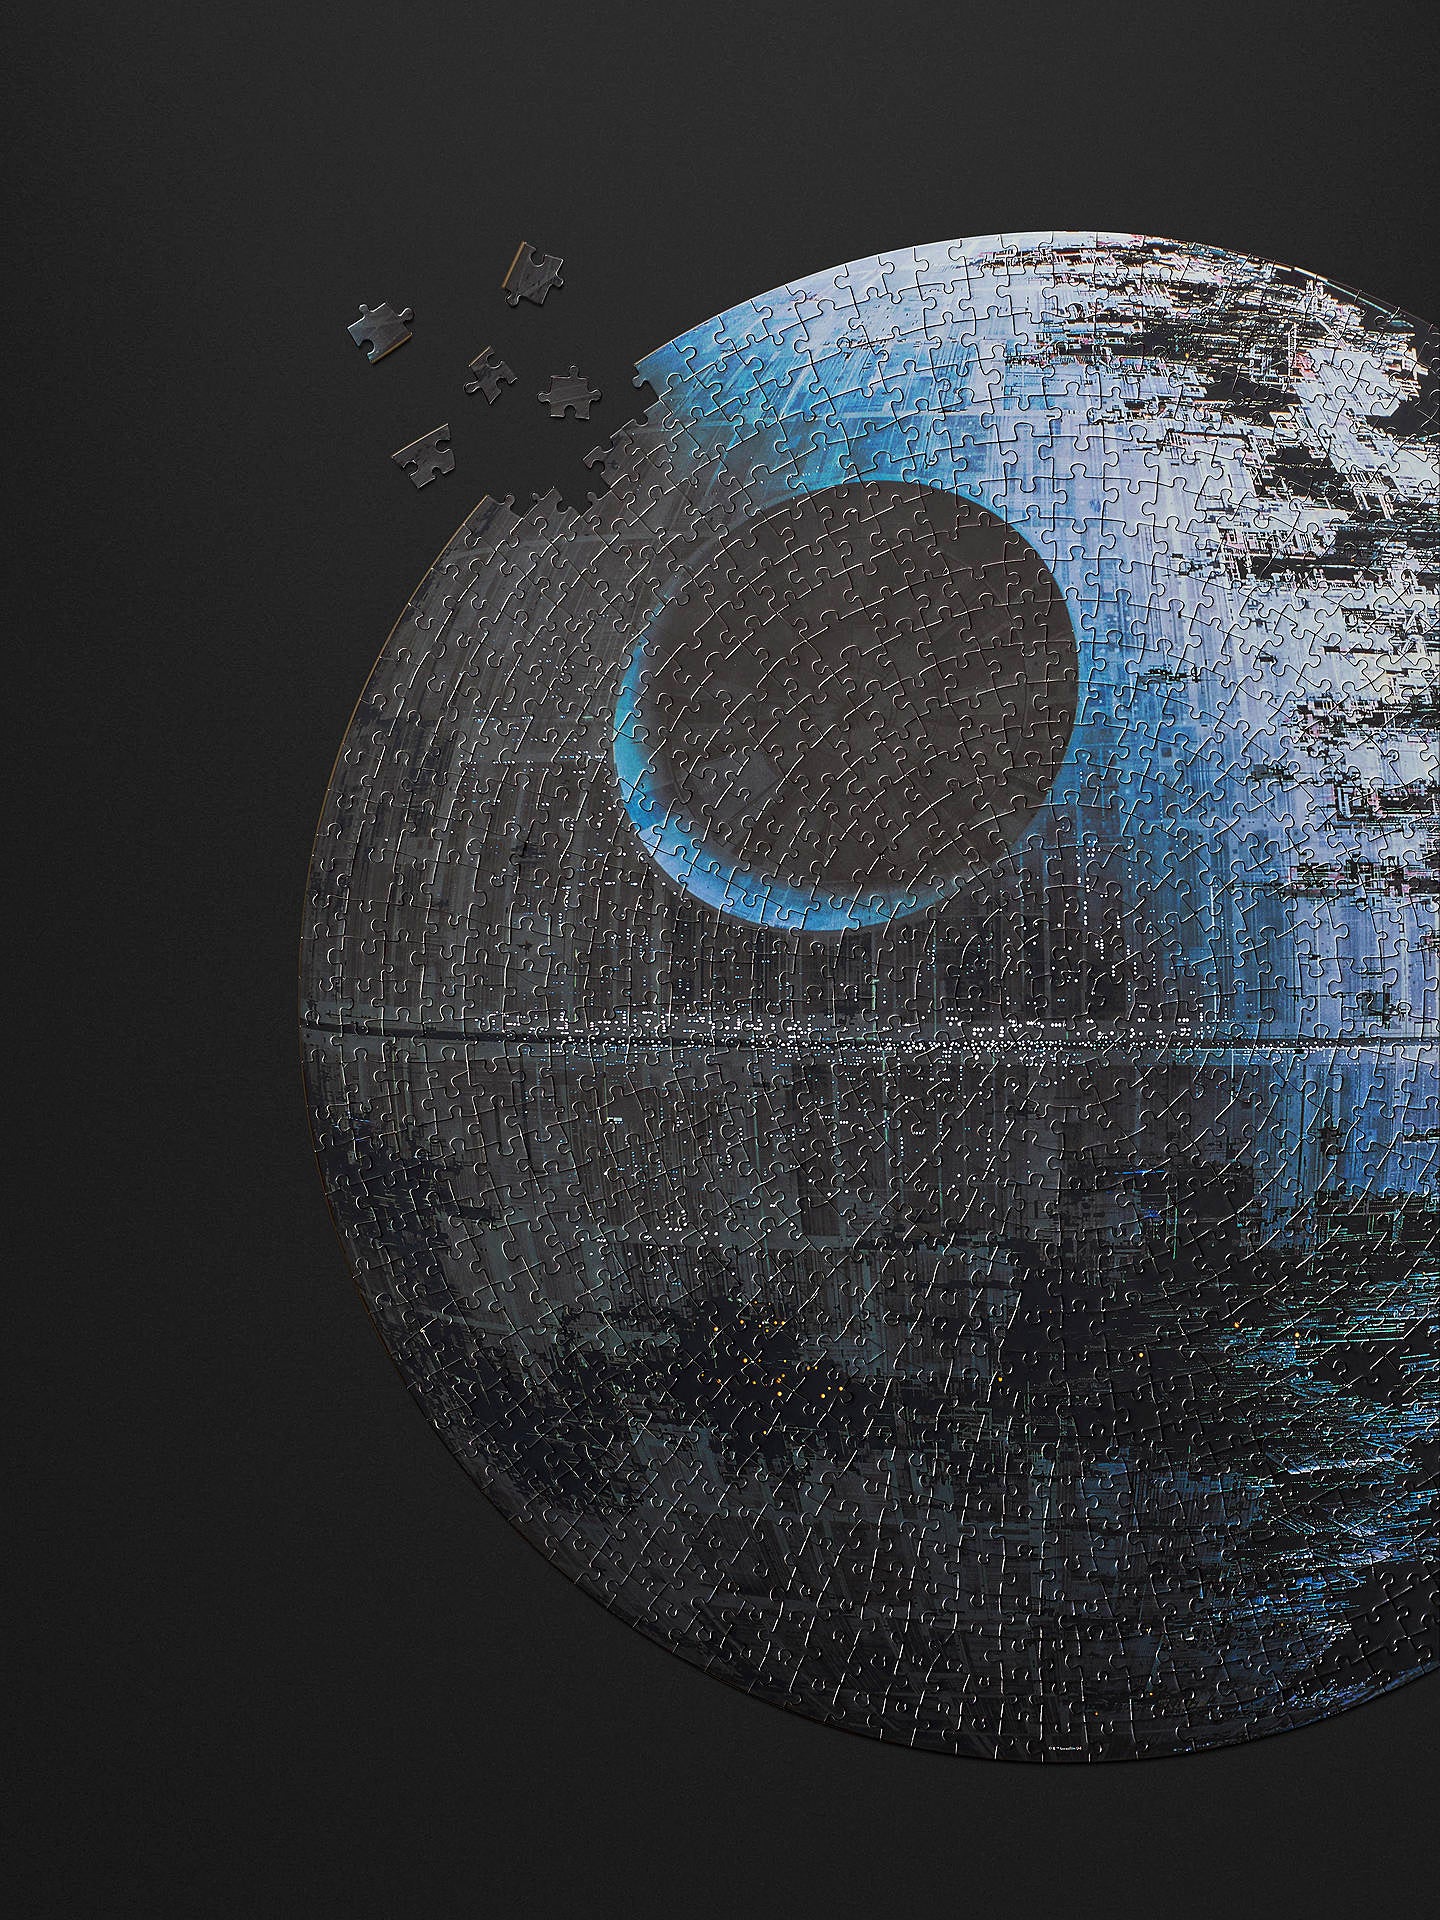 If you’re in the mood for a real challenge (and we mean it), this one-of-a-kind round Death Star jigsaw puzzle from Disney Star Wars is sure to stump even the most experienced puzzlers. 